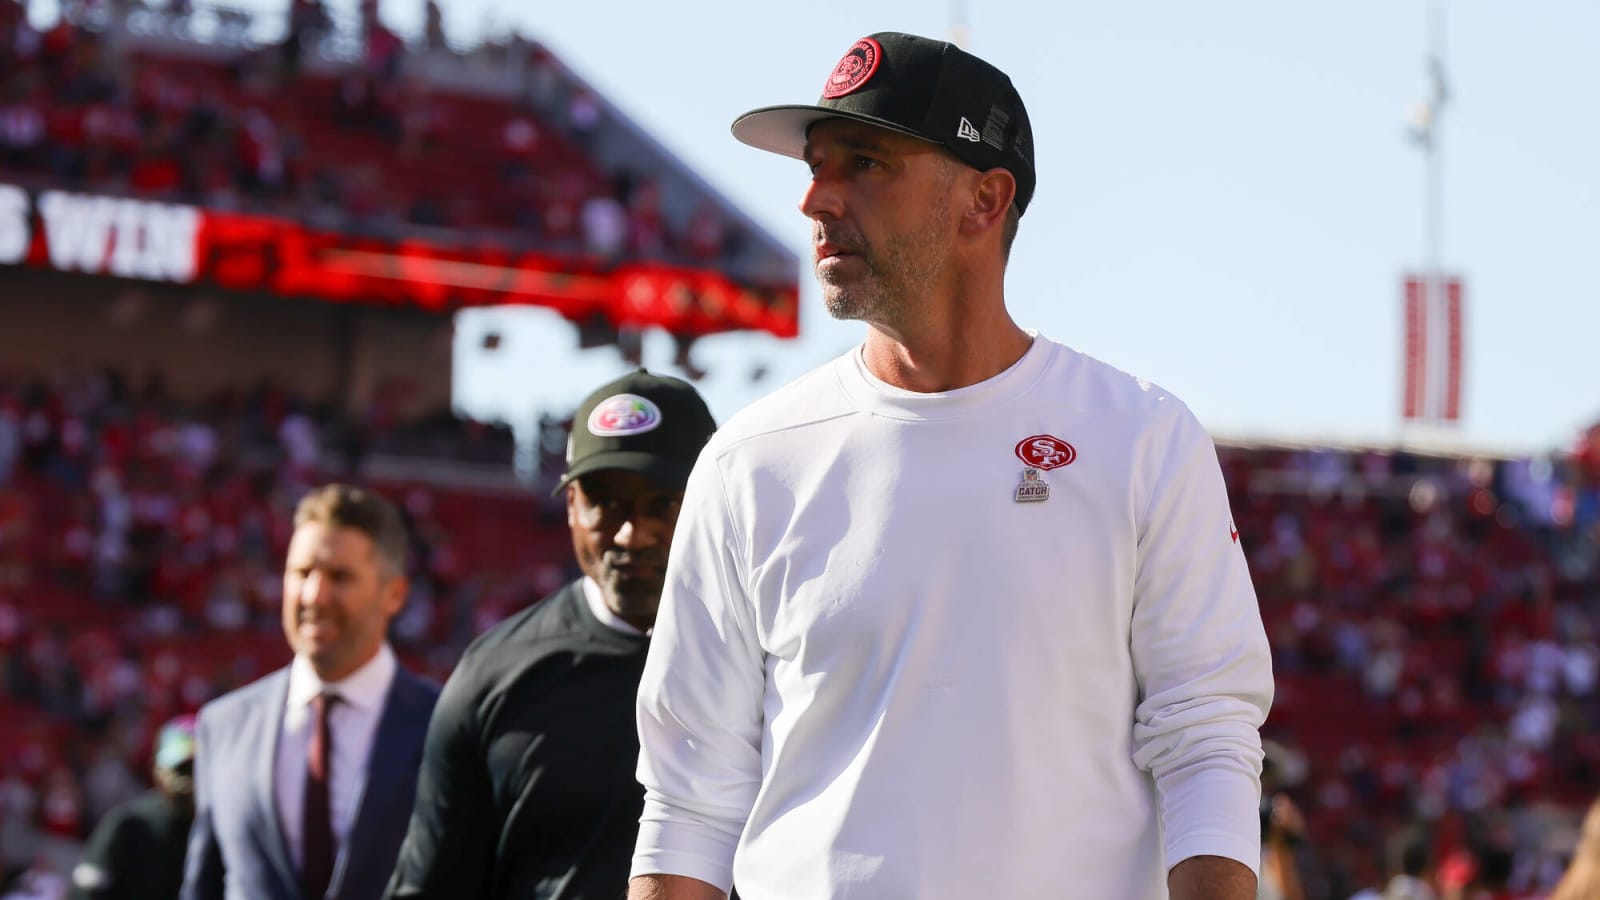 Kyle Shanahan discusses the challenge of facing Bengals wide receivers